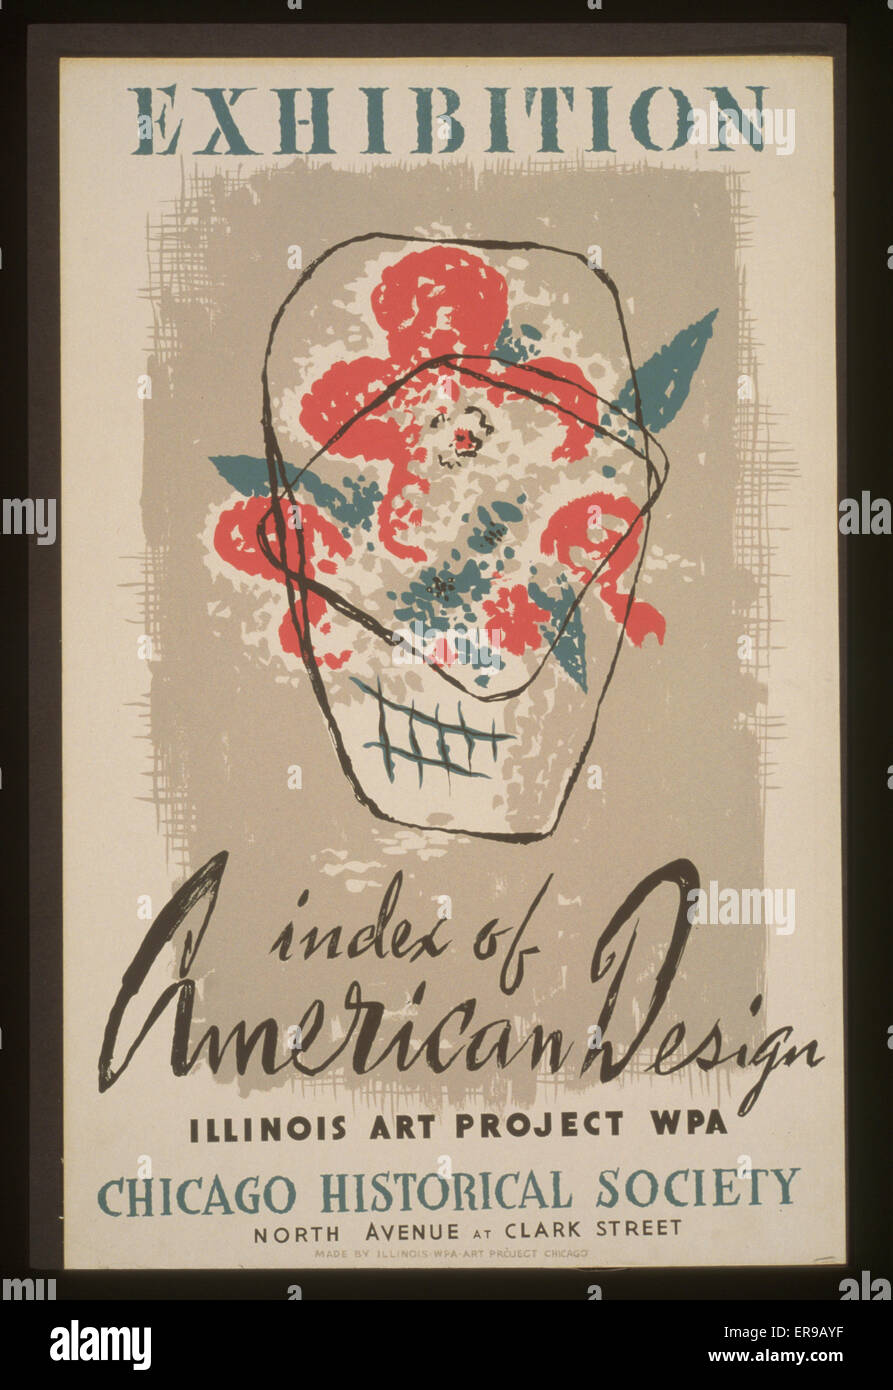 Exhibition Index of American Design. Poster for WPA exhibition of Index of American Design at the Chicago Historical Society. Date 1941. Stock Photo